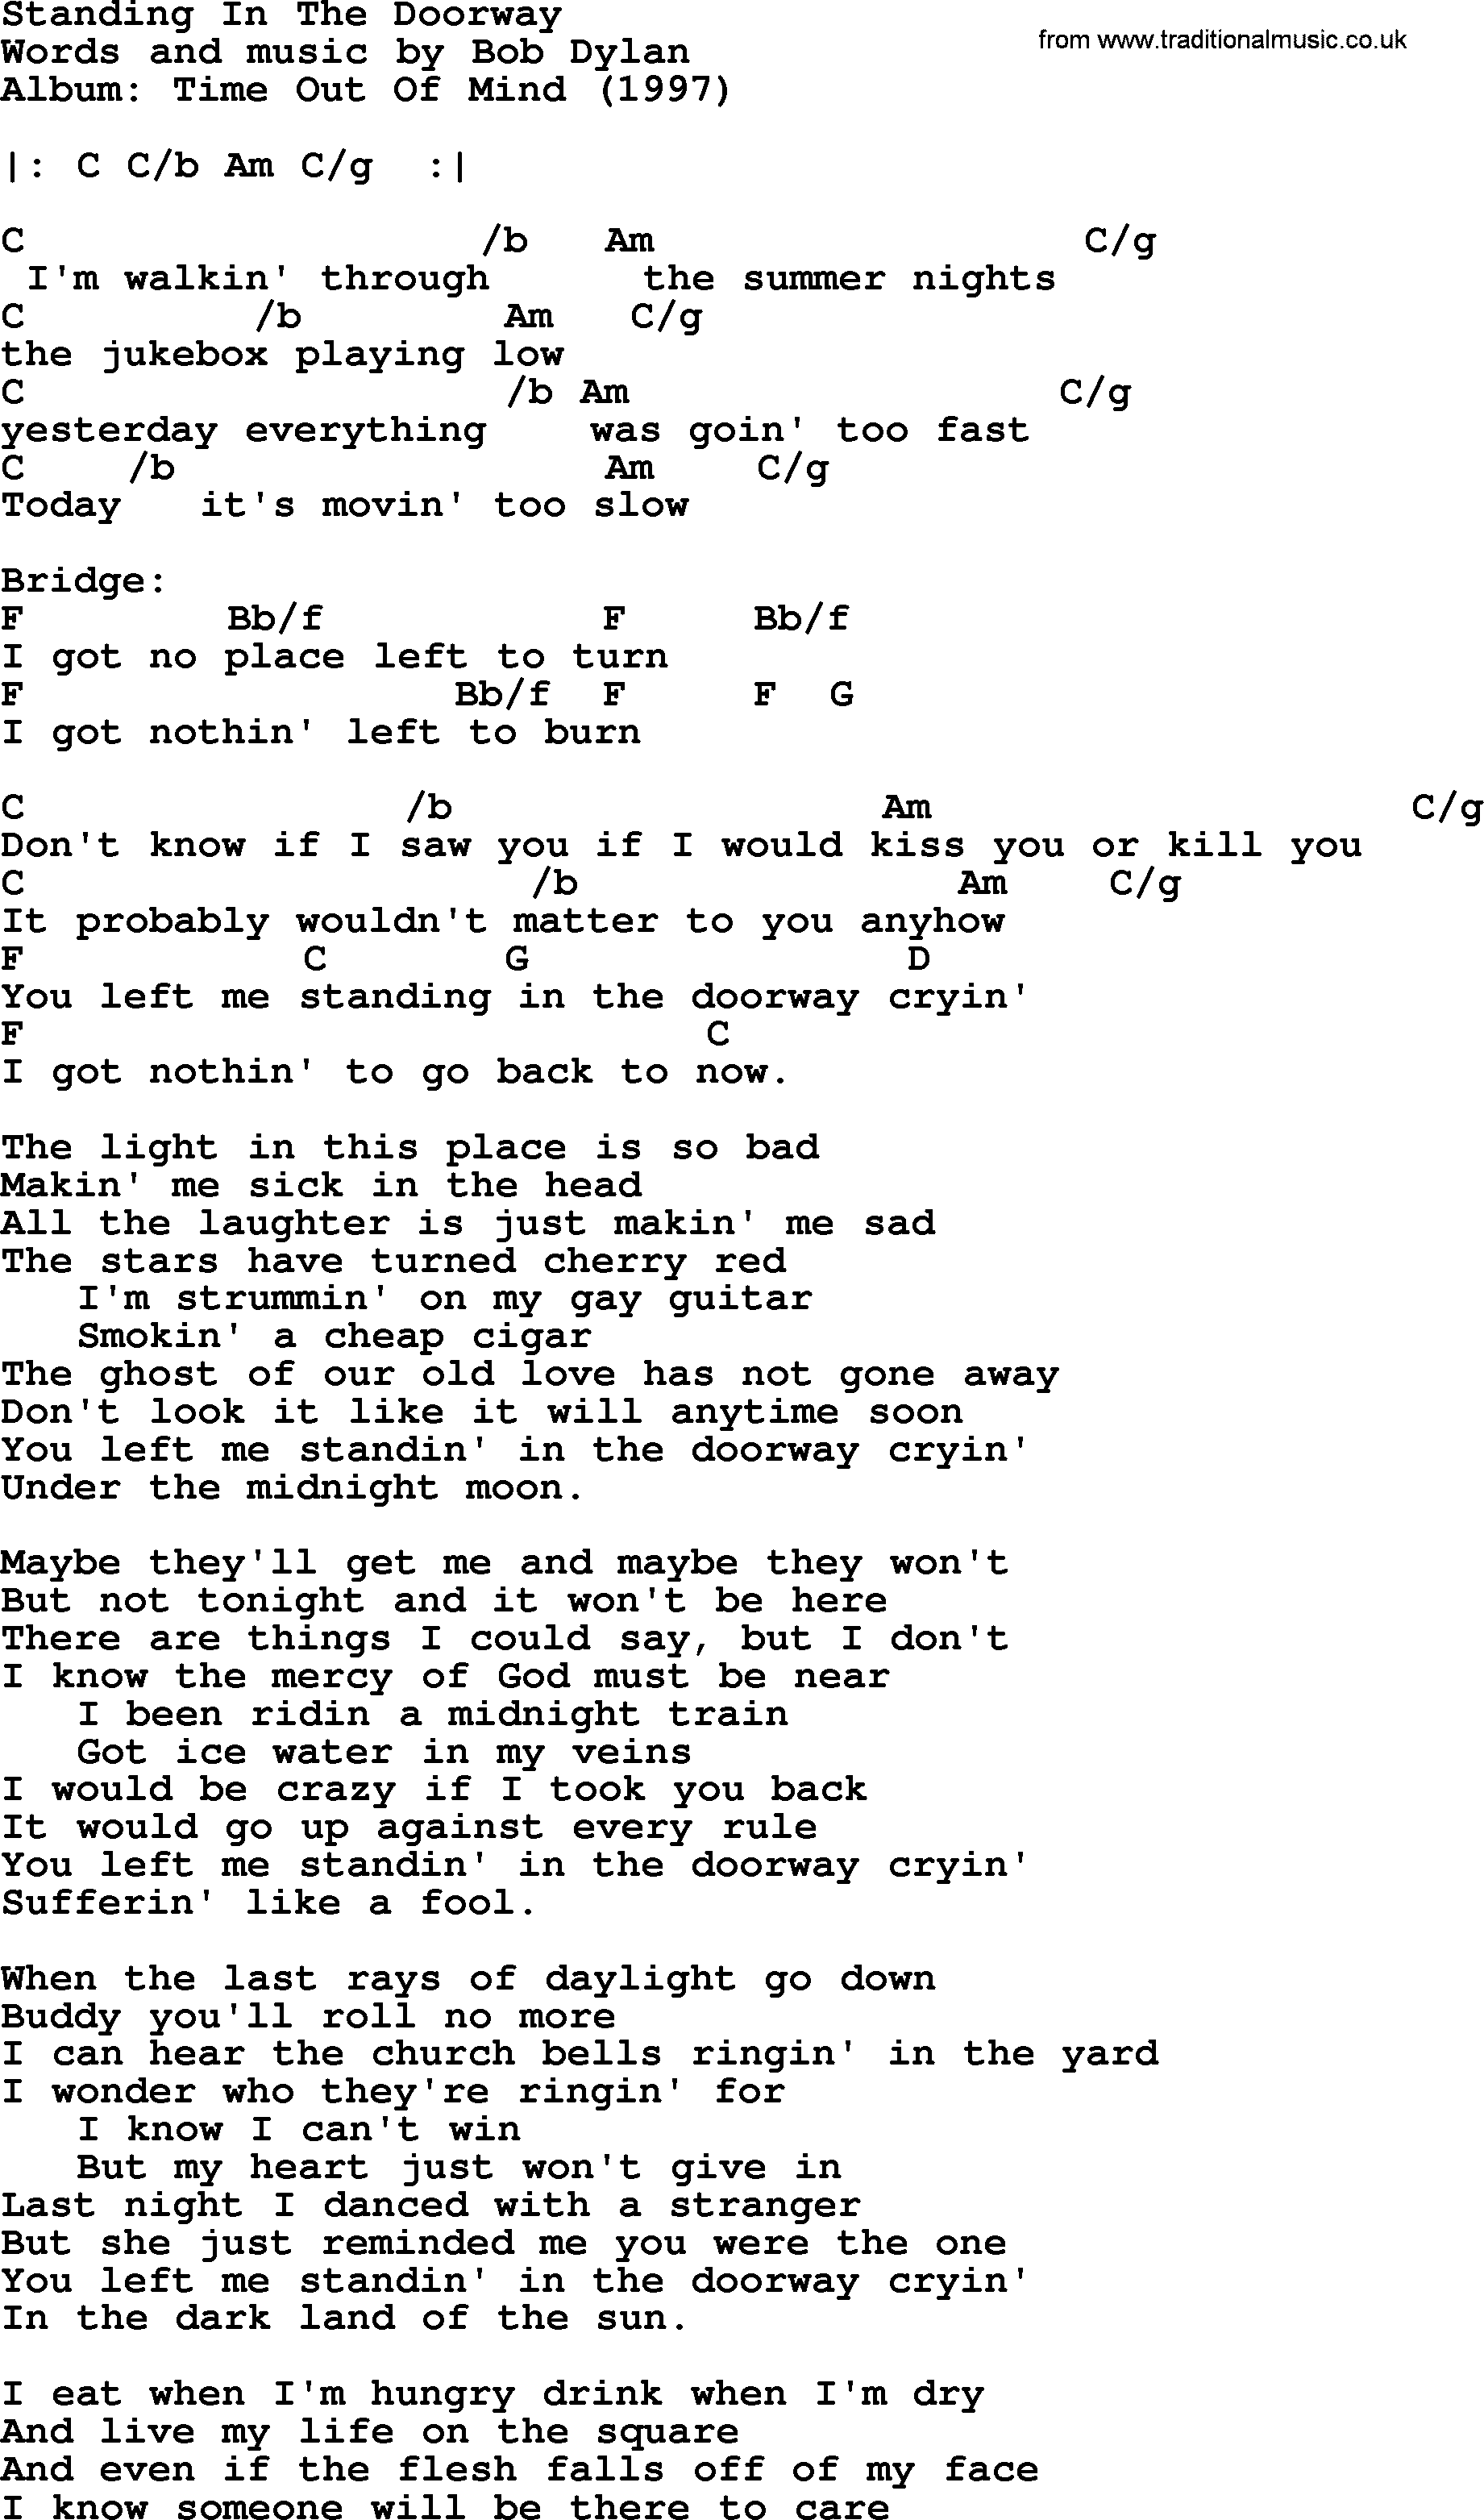 Bob Dylan song - Standing In The Doorway, lyrics and chords